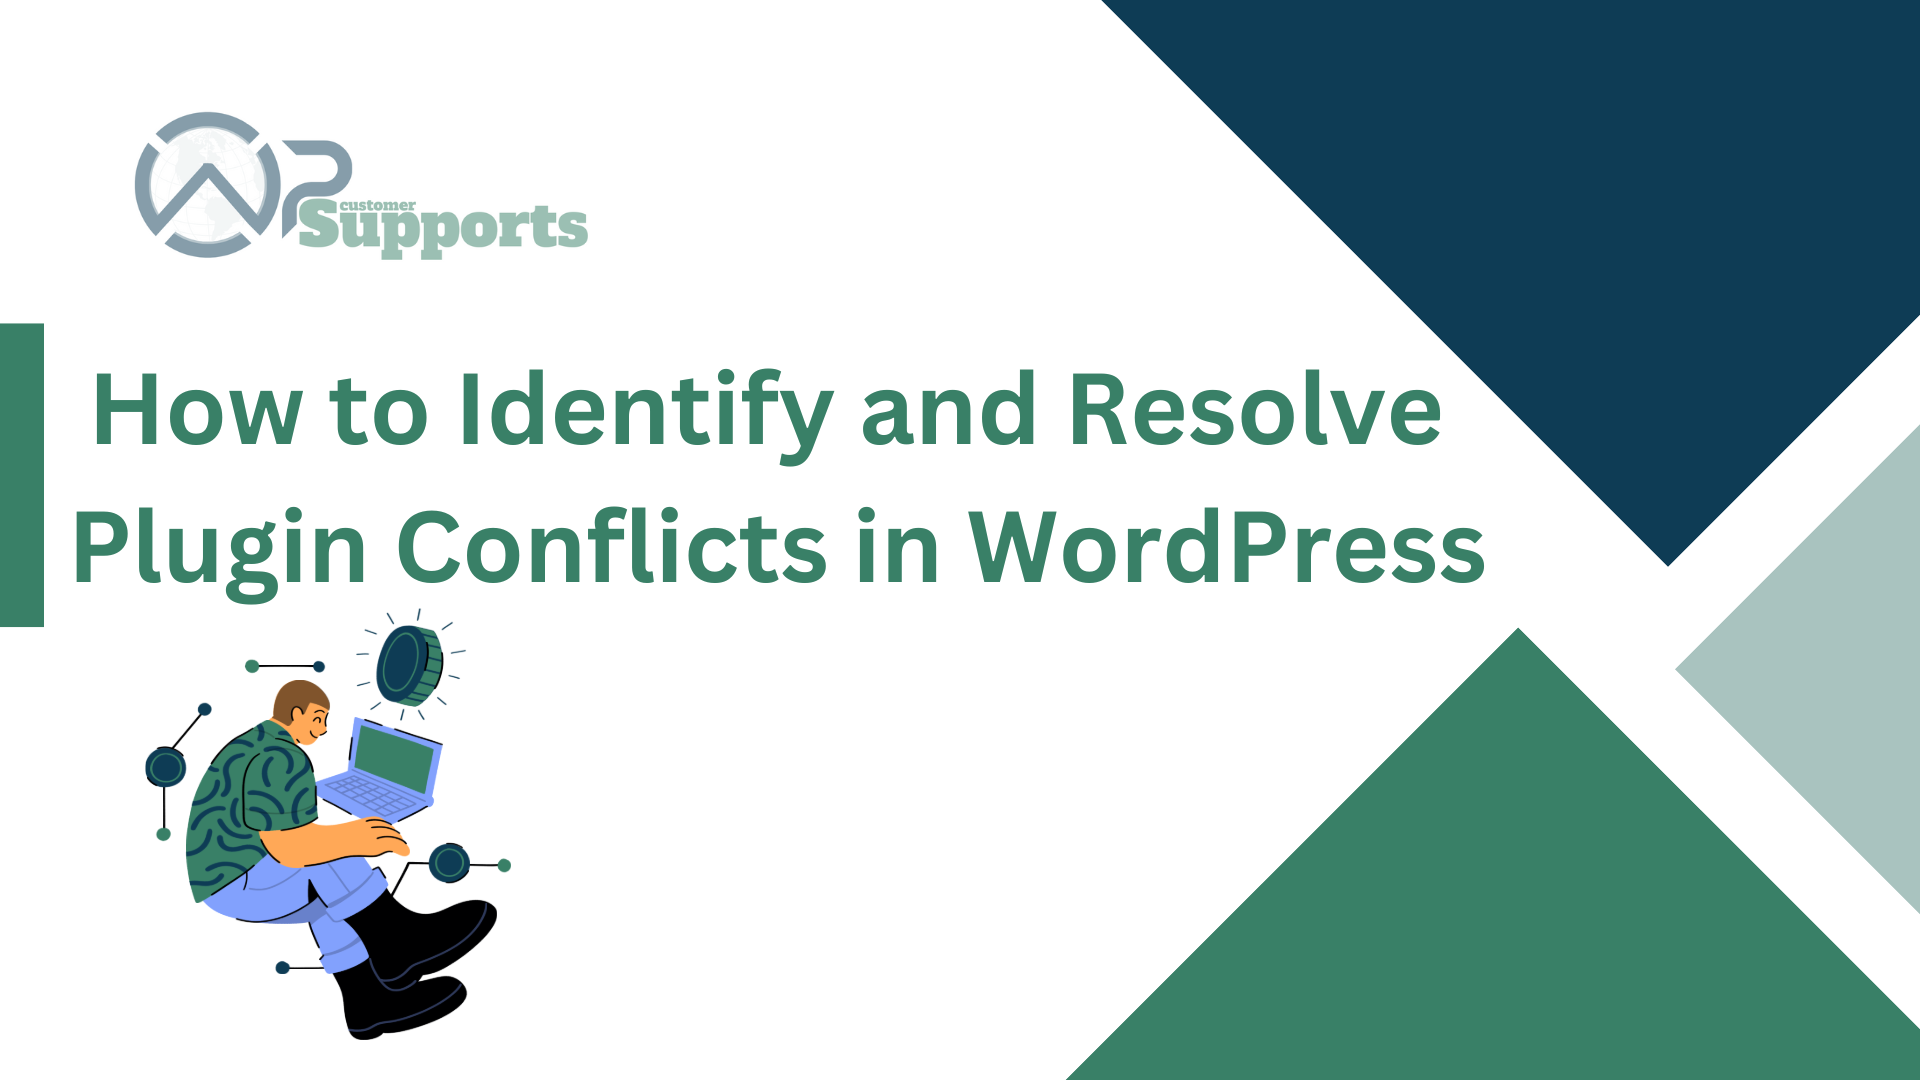 How to Identify and Resolve Plugin Conflicts in WordPress